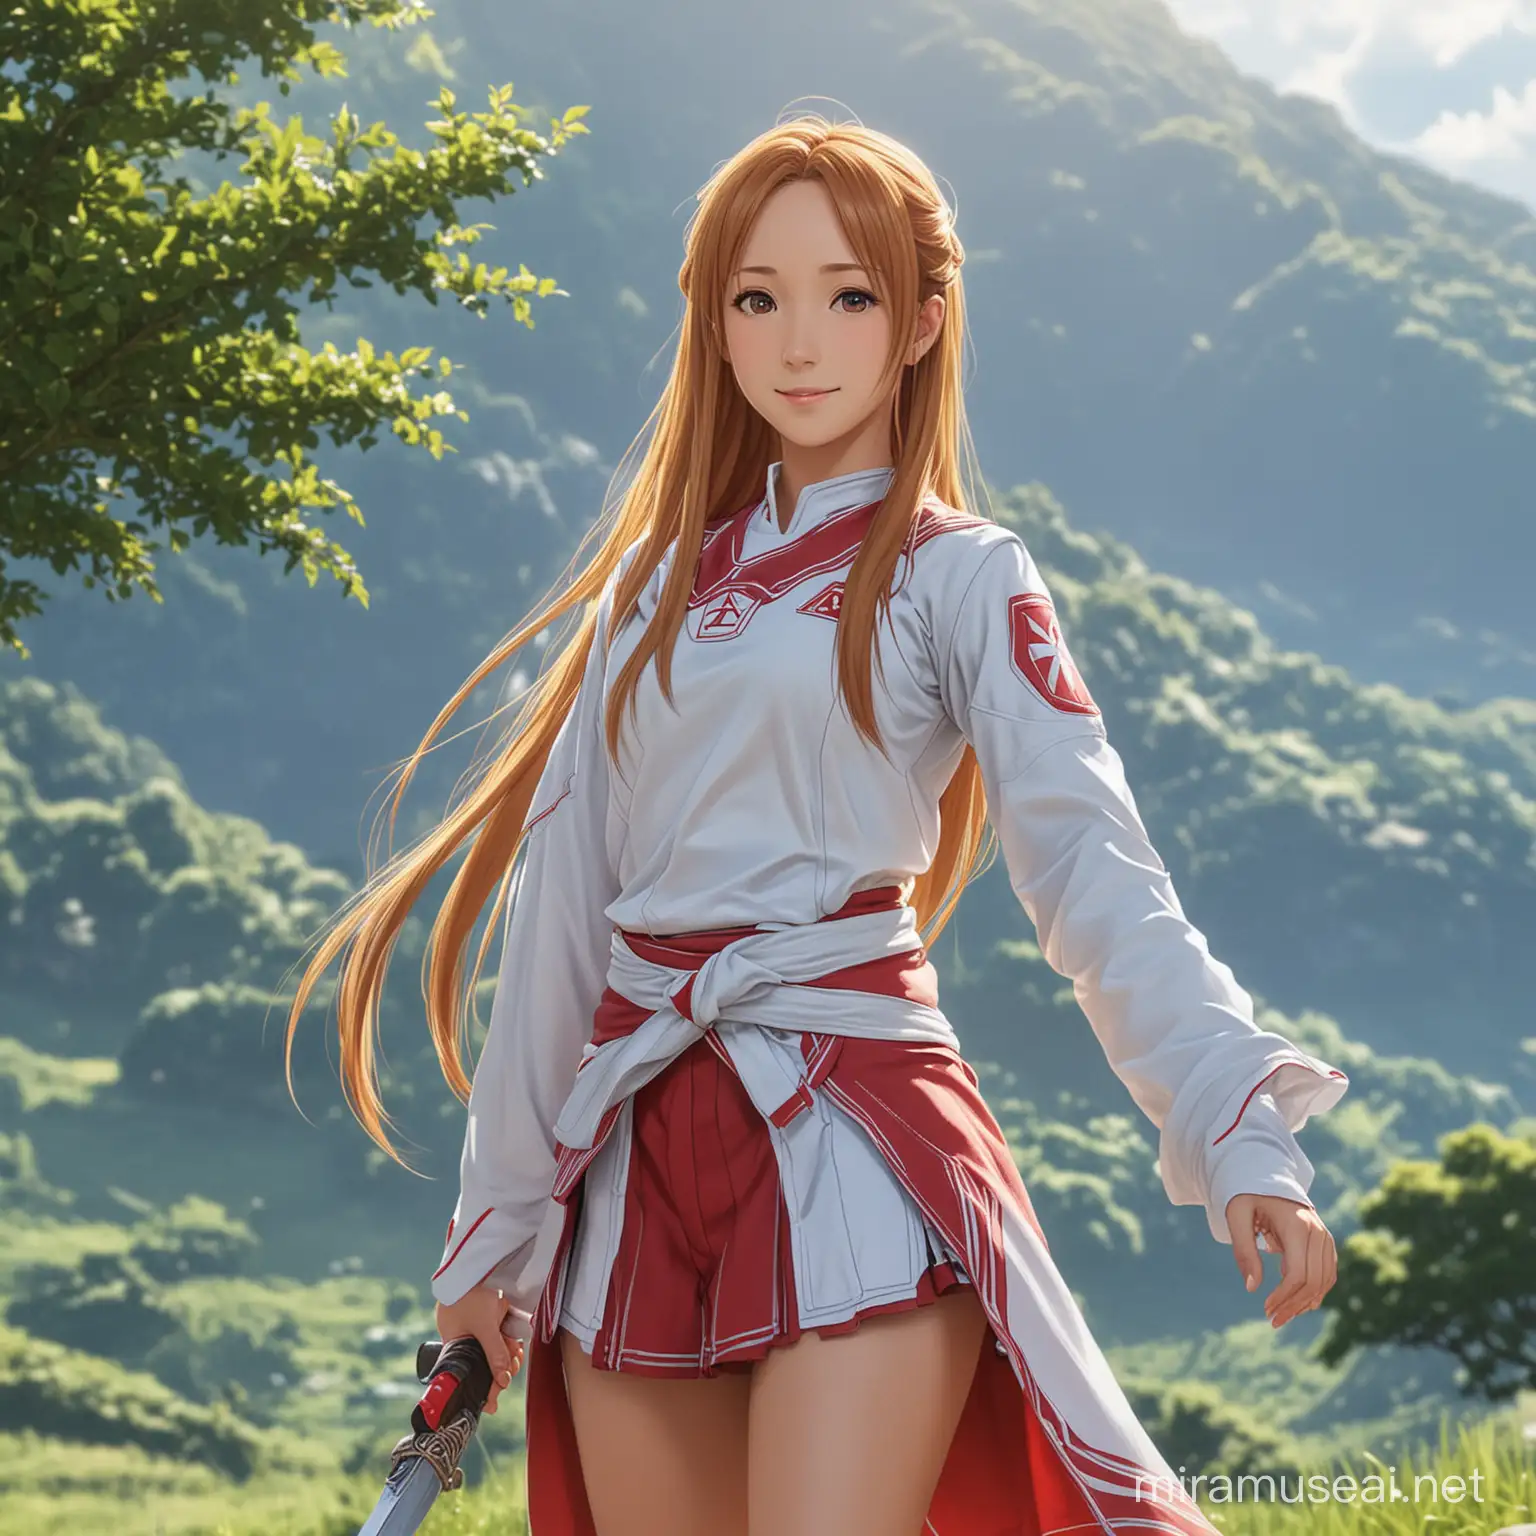 Asuna from SAO Enjoying a Sunny Day in the Countryside